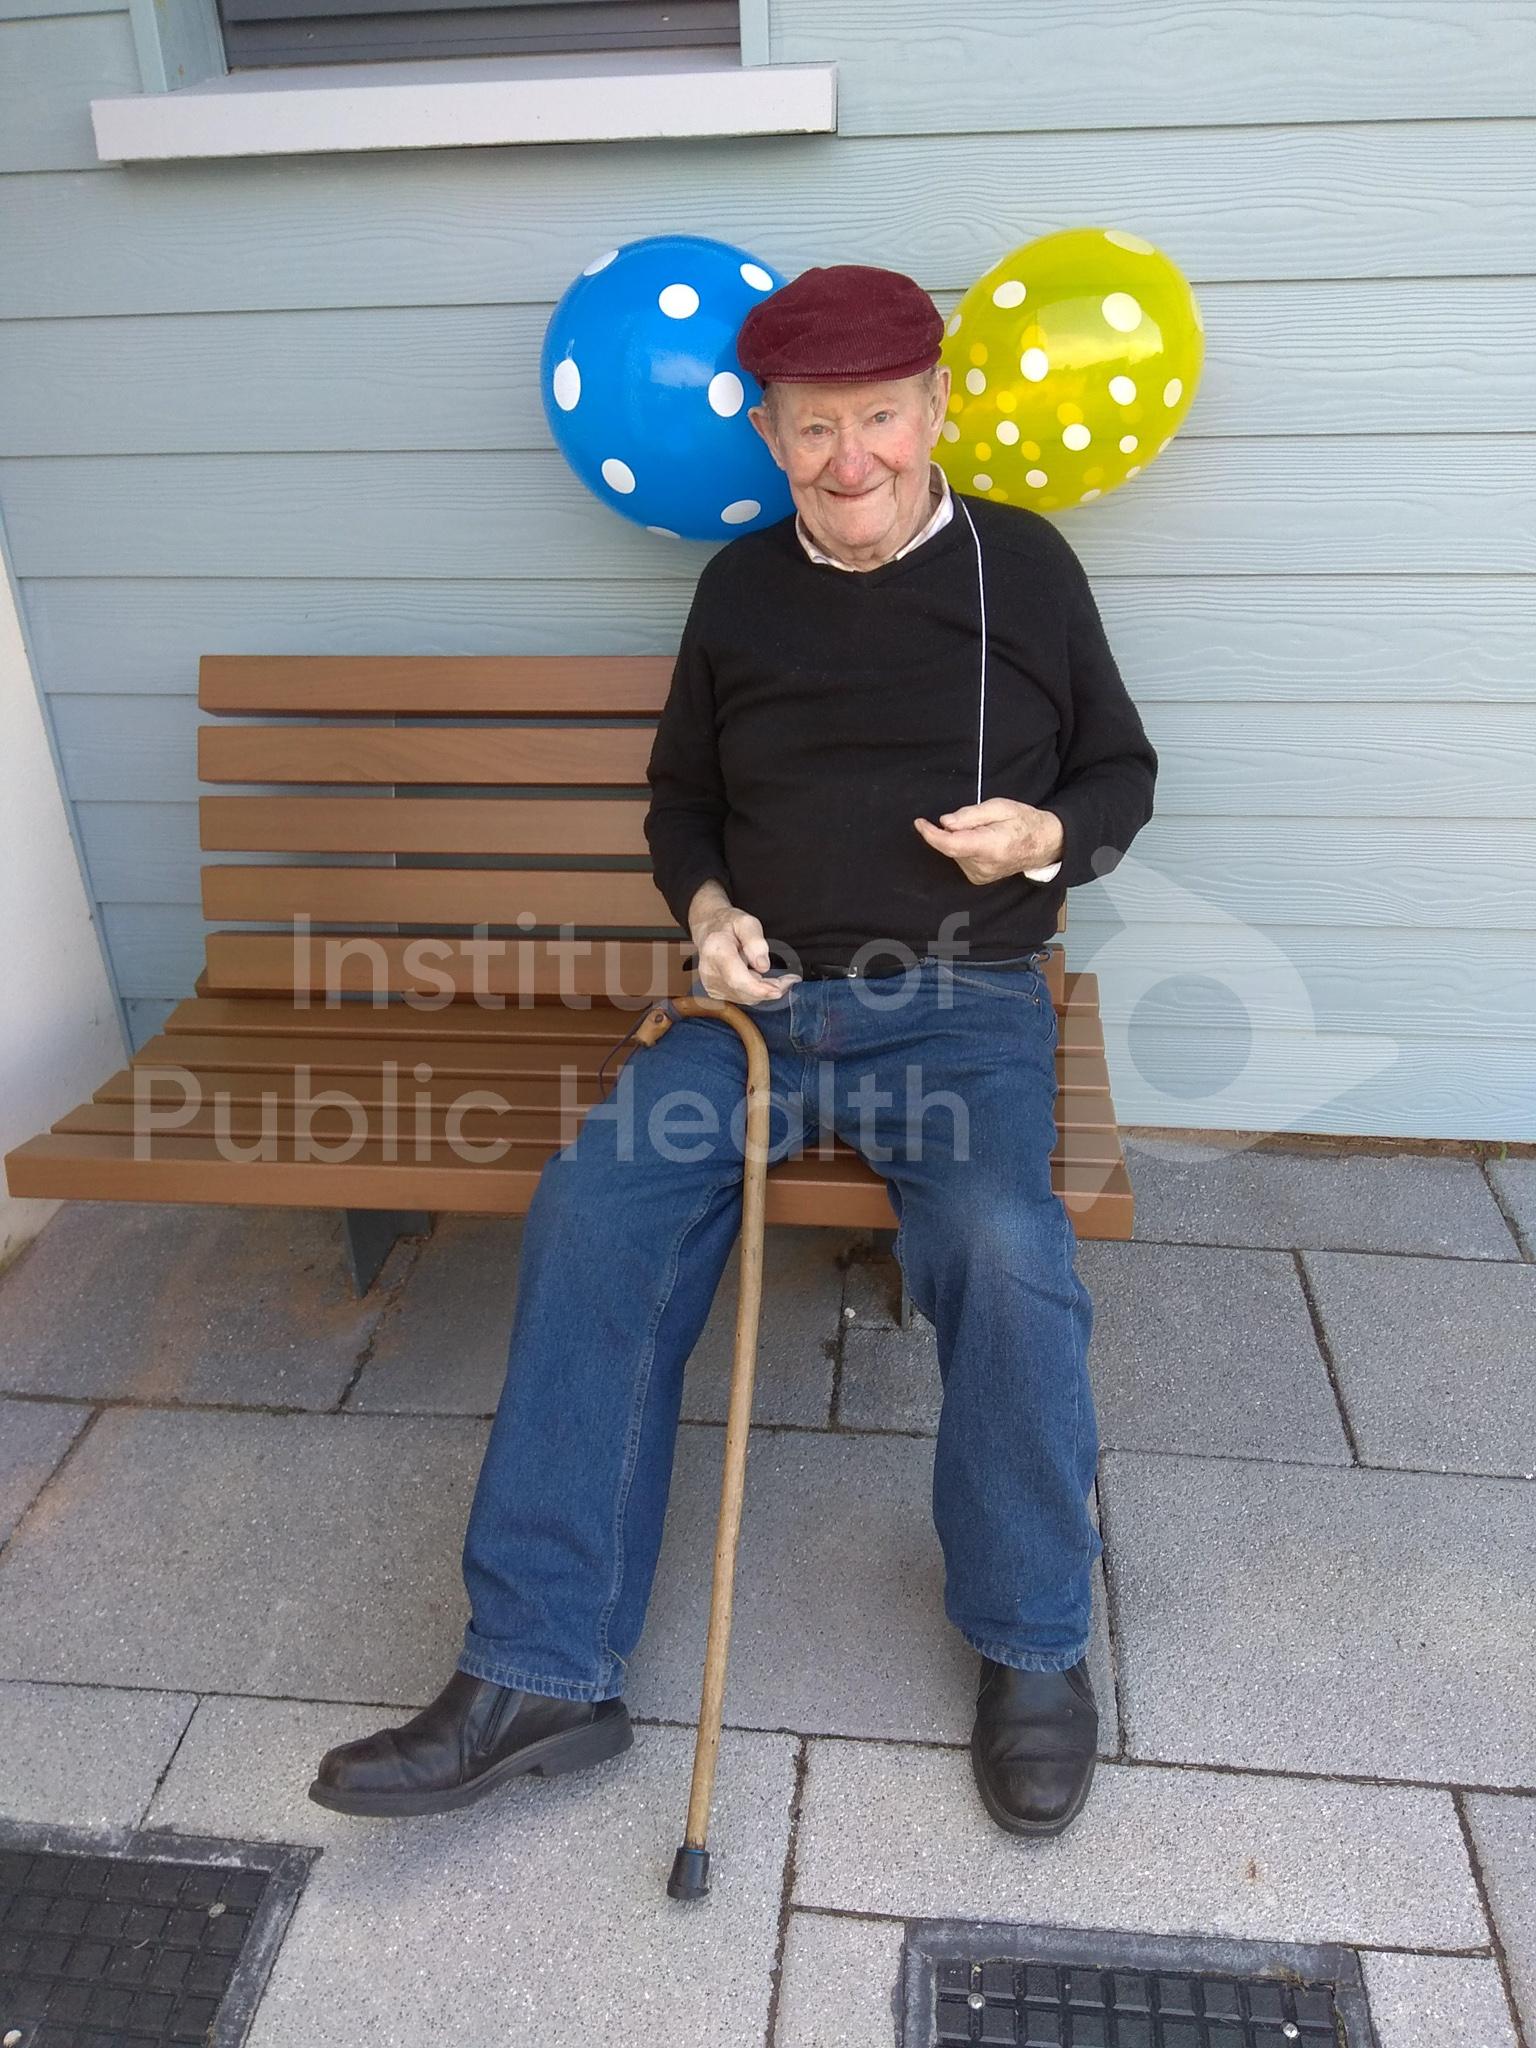 95 year old Joe is never to old to celebrate